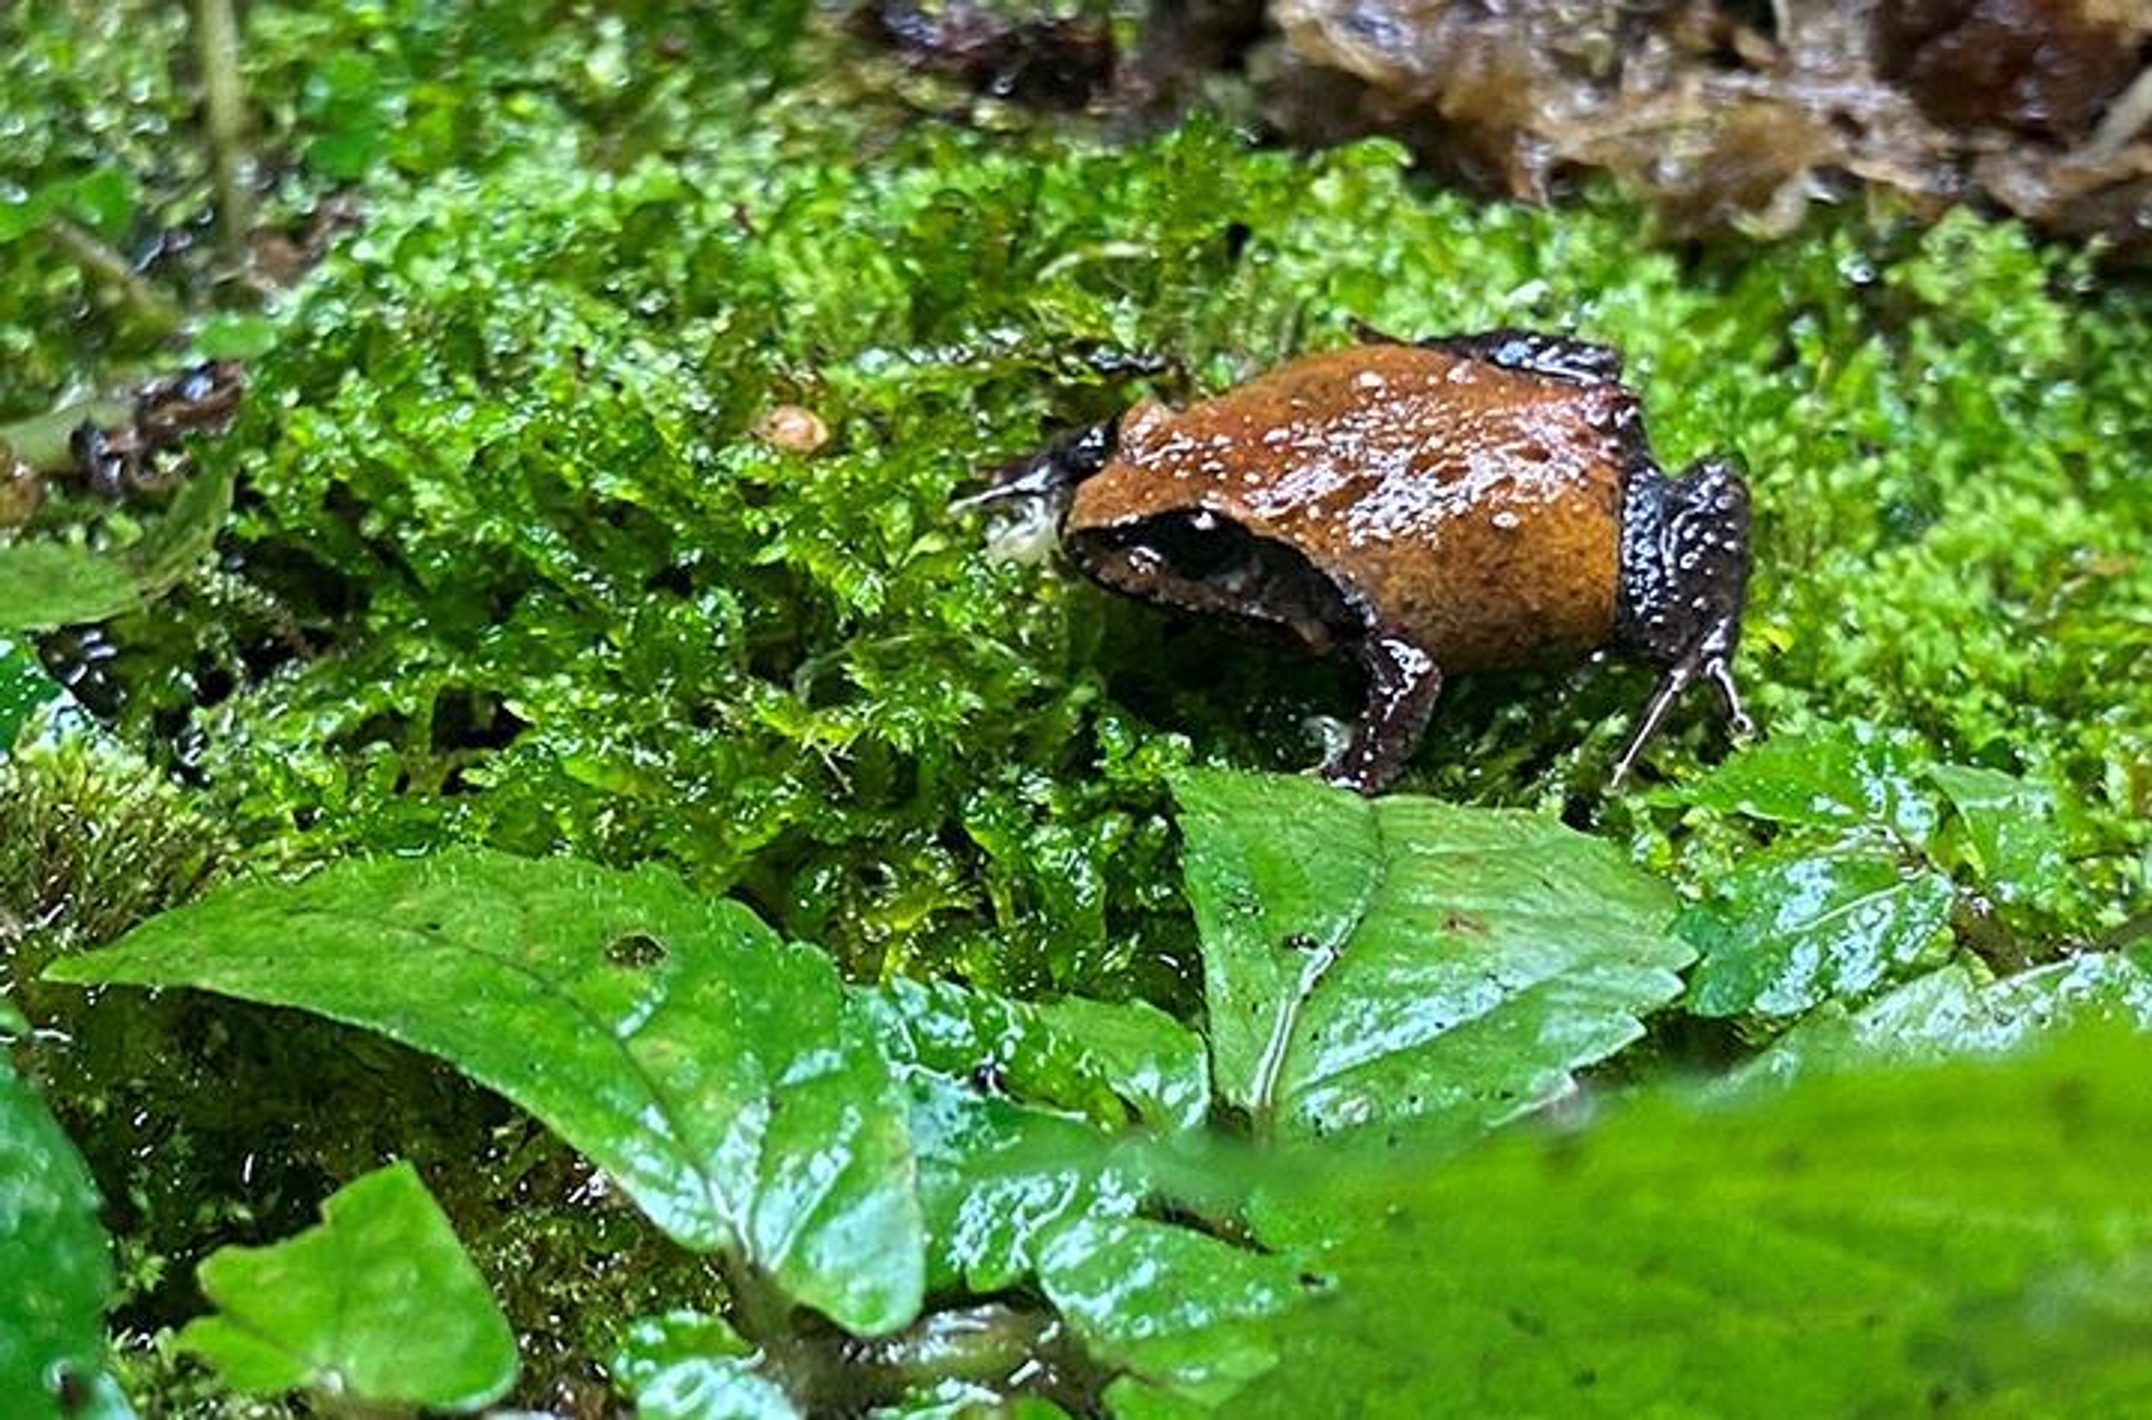 A small brown frog surrounded by green vegetation